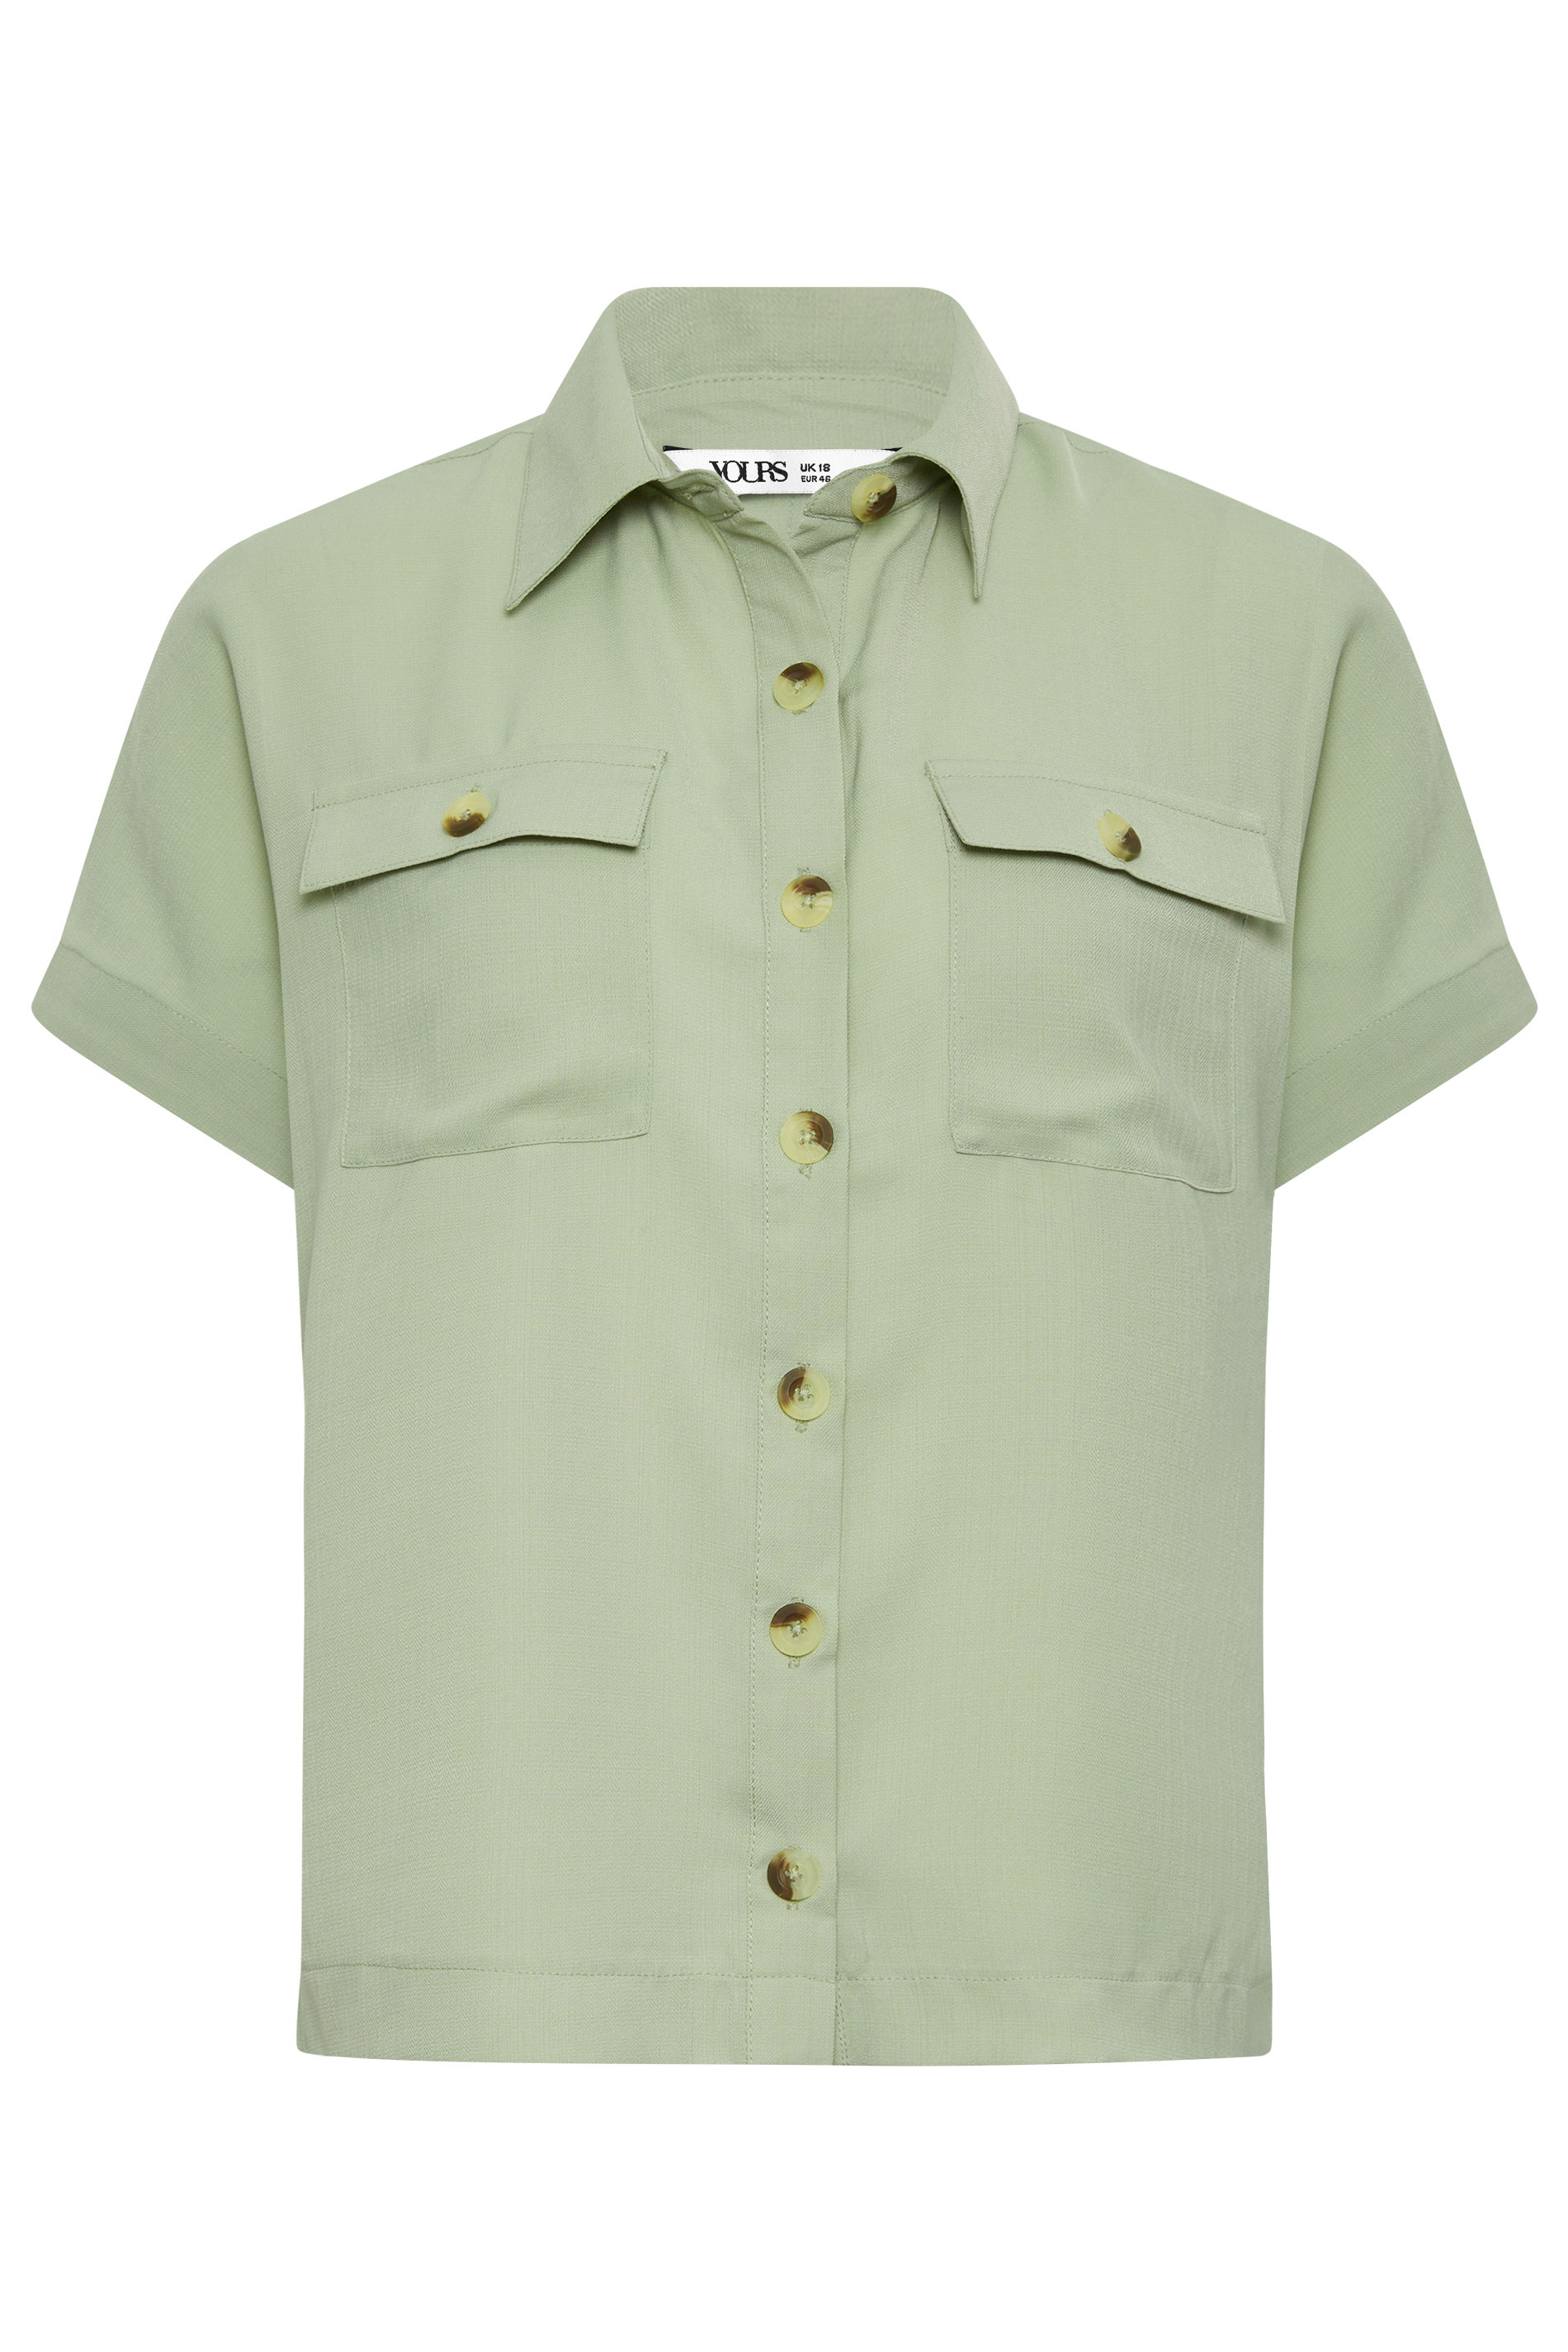 YOURS PETITE Plus Size Sage Green Utility Pocket Shirt | Yours Clothing 1